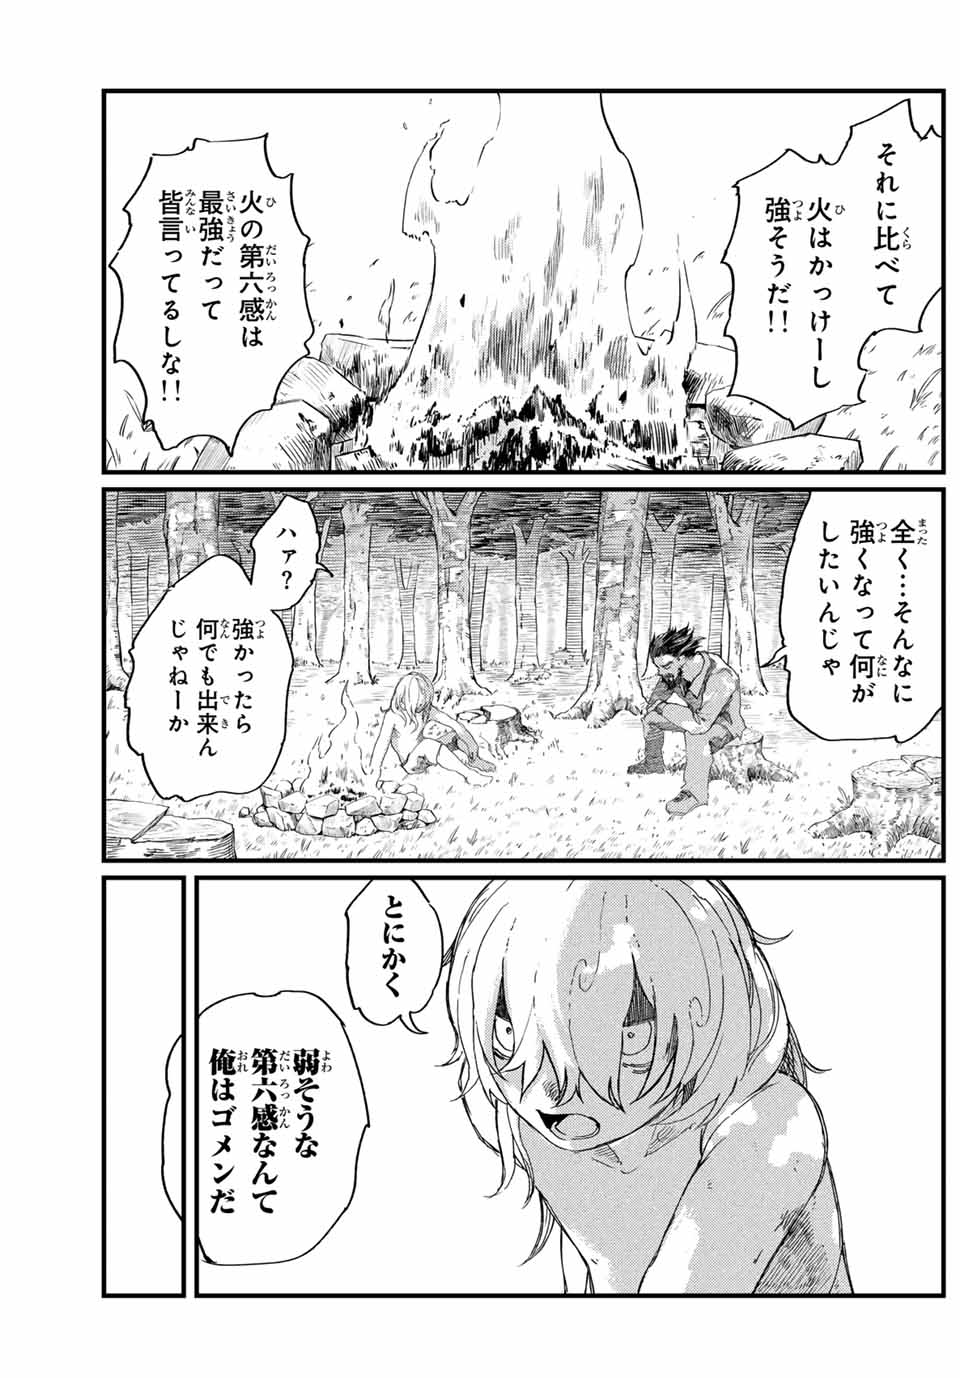 MAN OF RUST 第14話 - Page 5